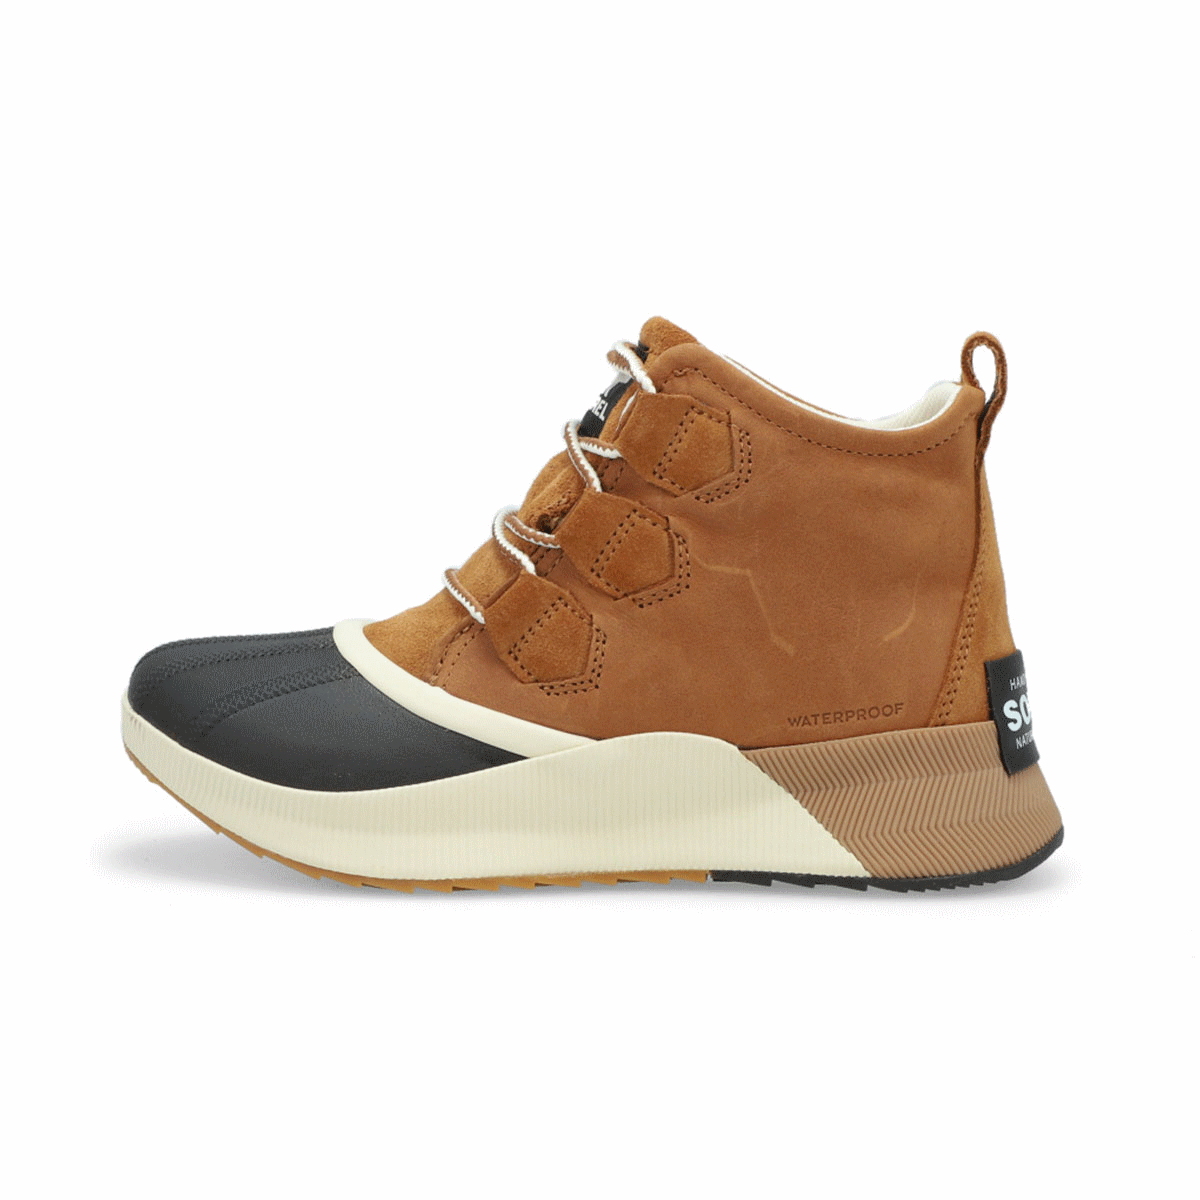 Sorel Women's Out'N About III Waterproof Boot | SoftMoc.com